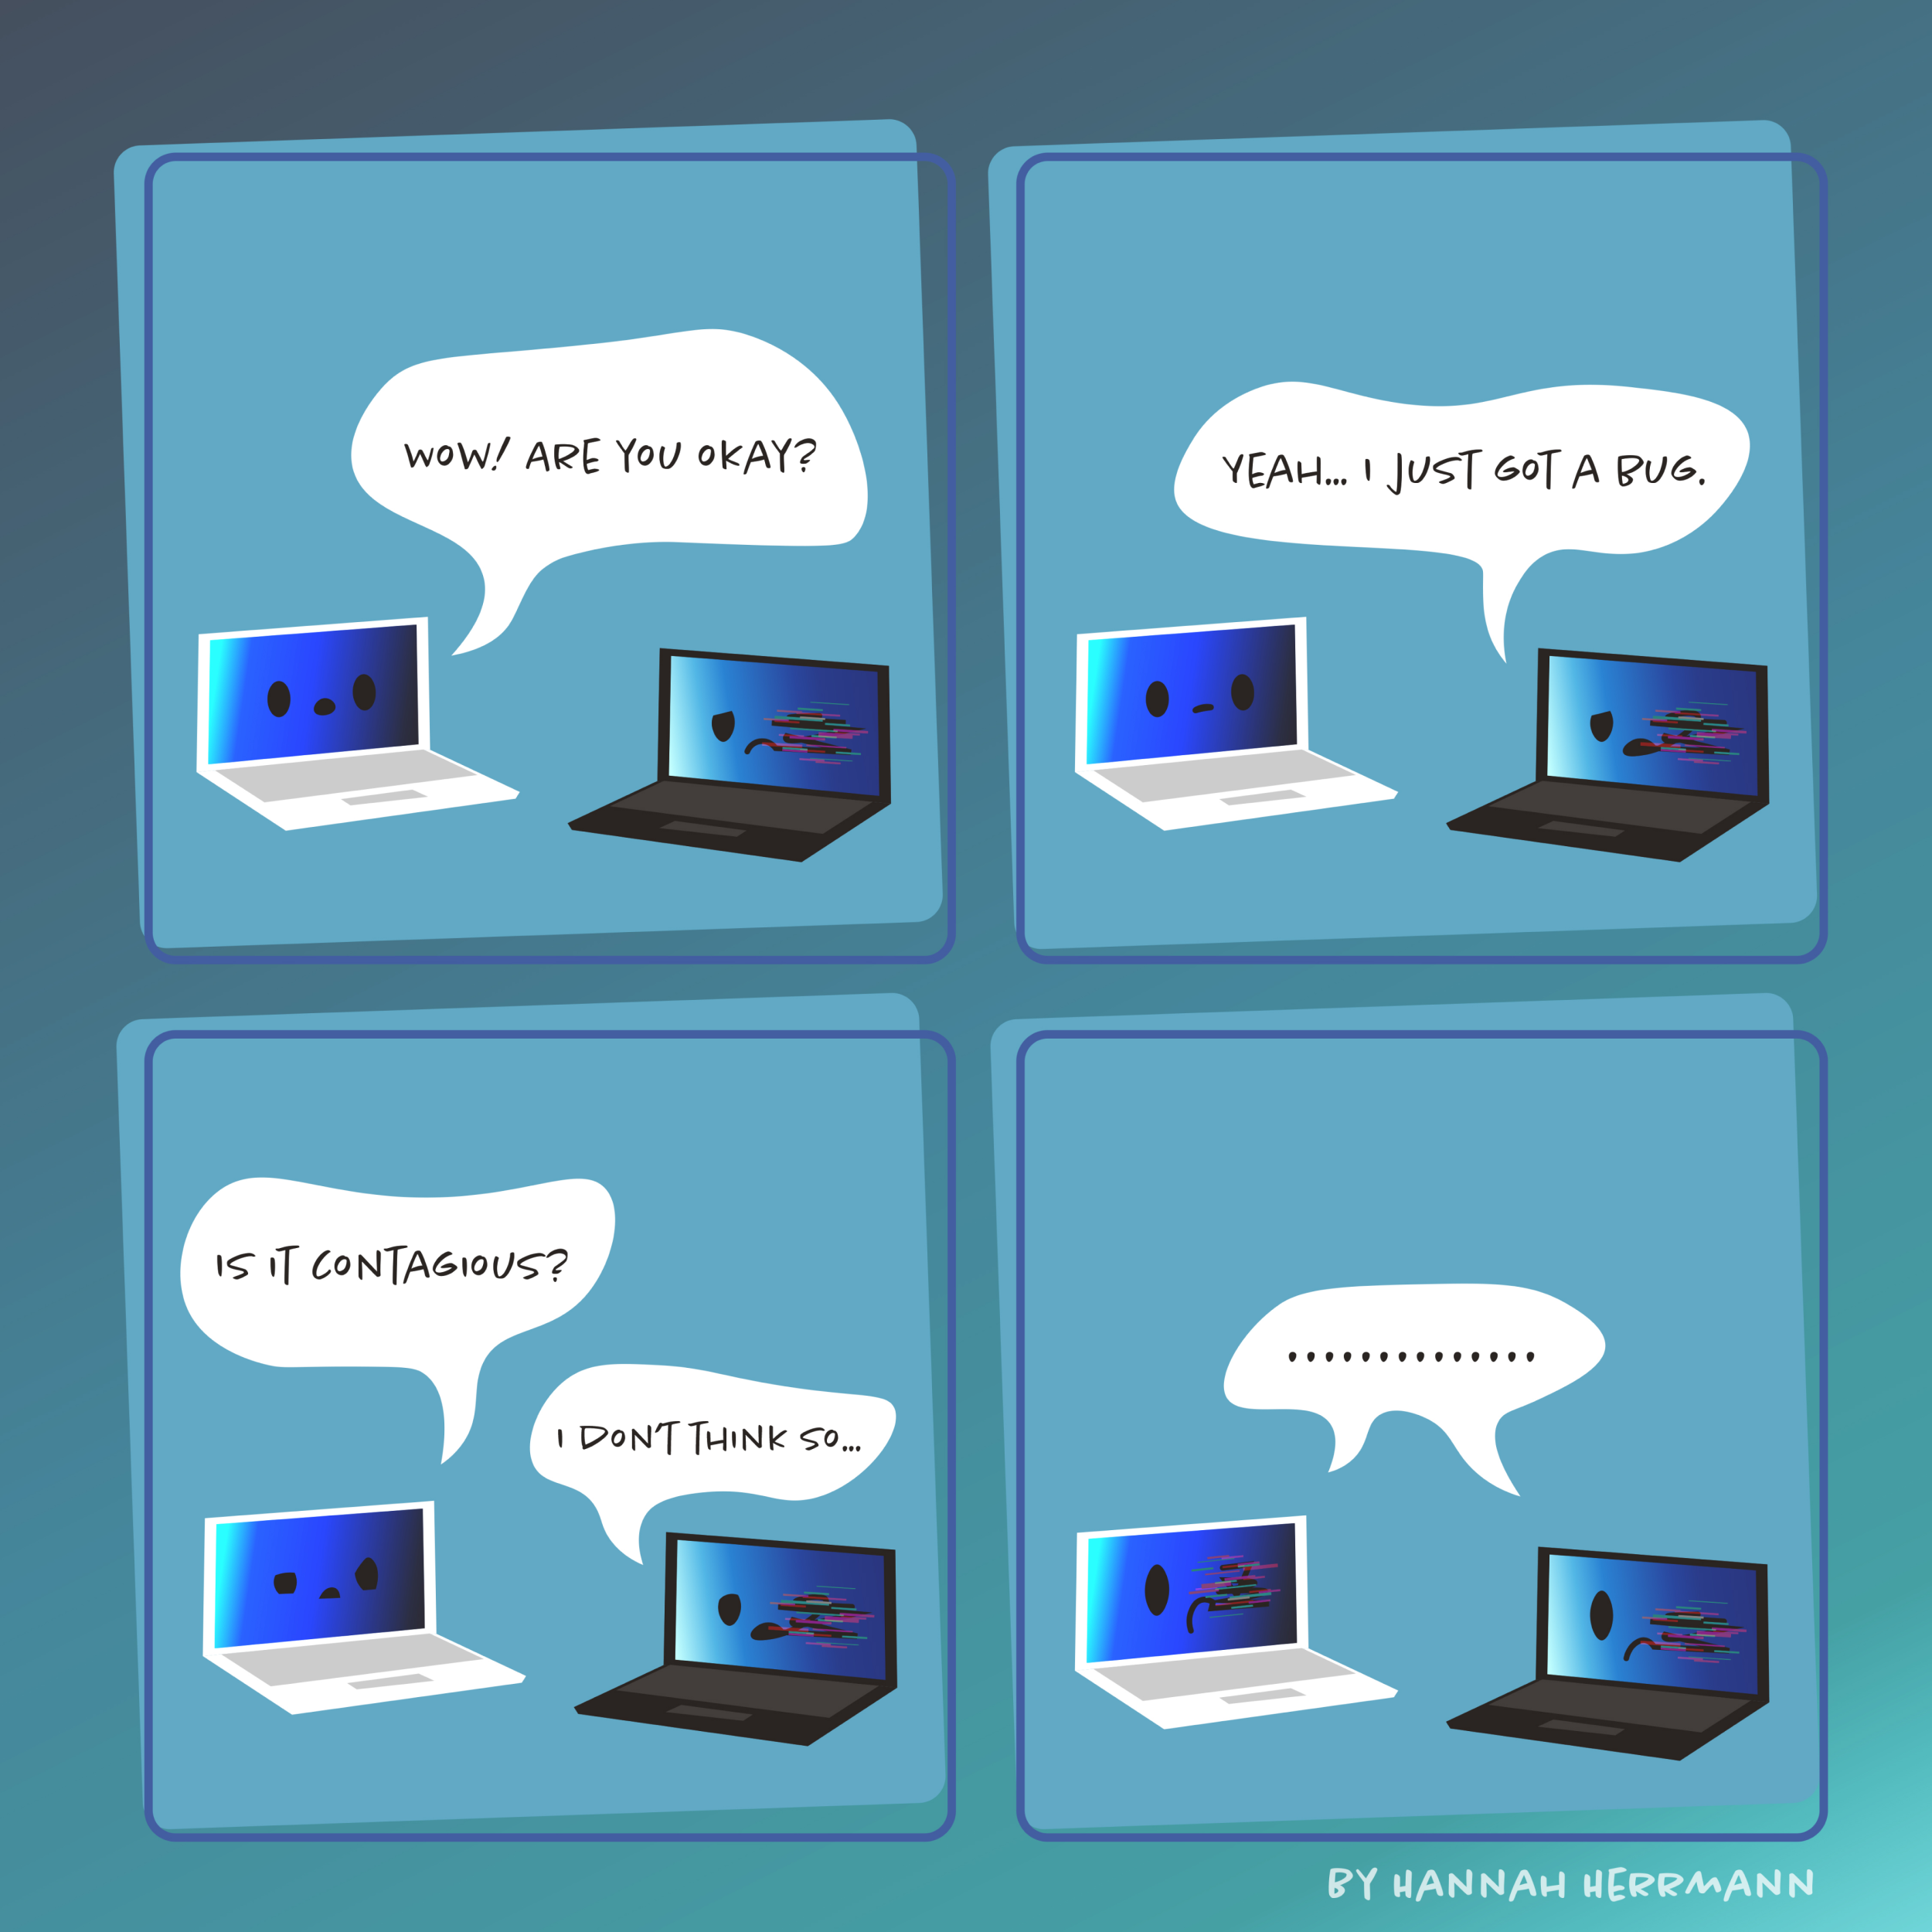 Comic of two laptops talking together